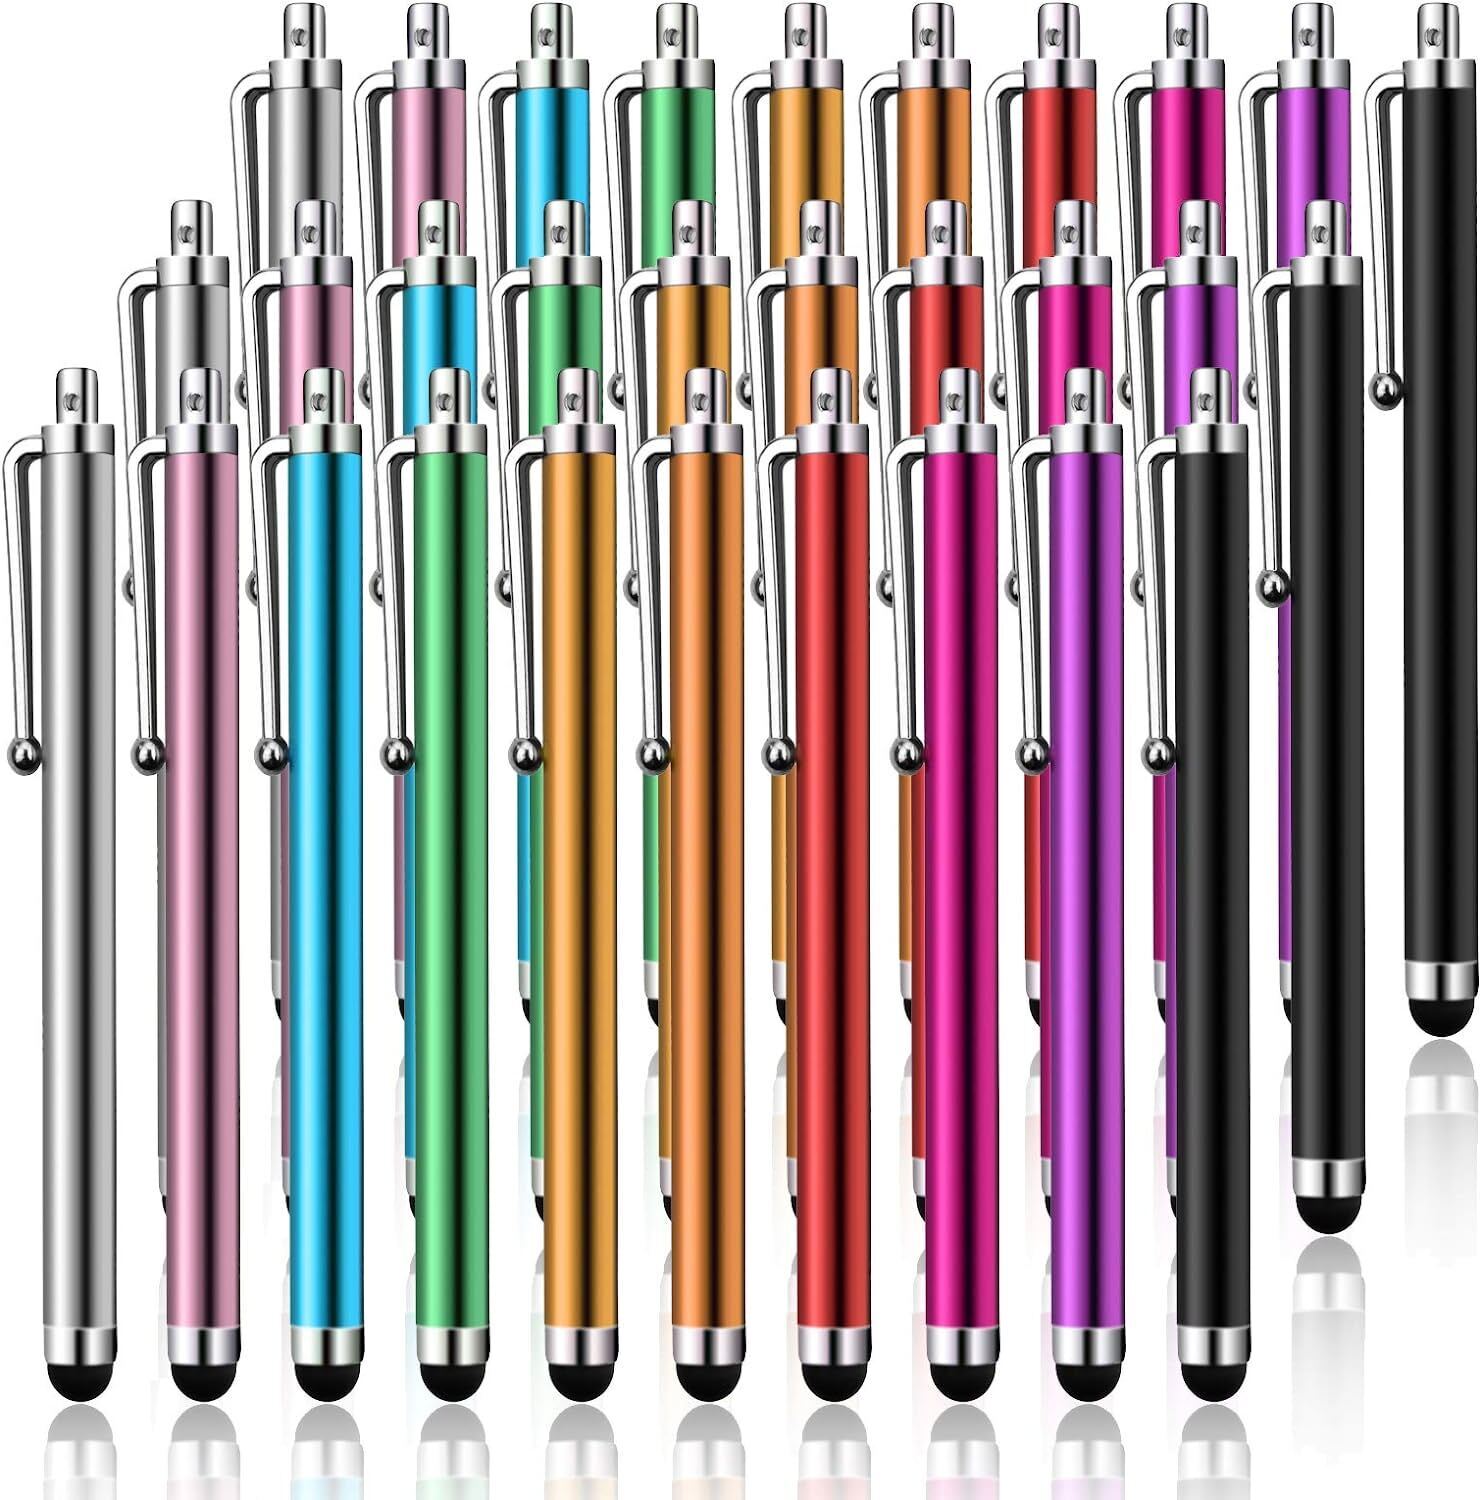 Capacitive Touch Screen Stylus Pen Universal For iPhone iPad Samsung Tablet